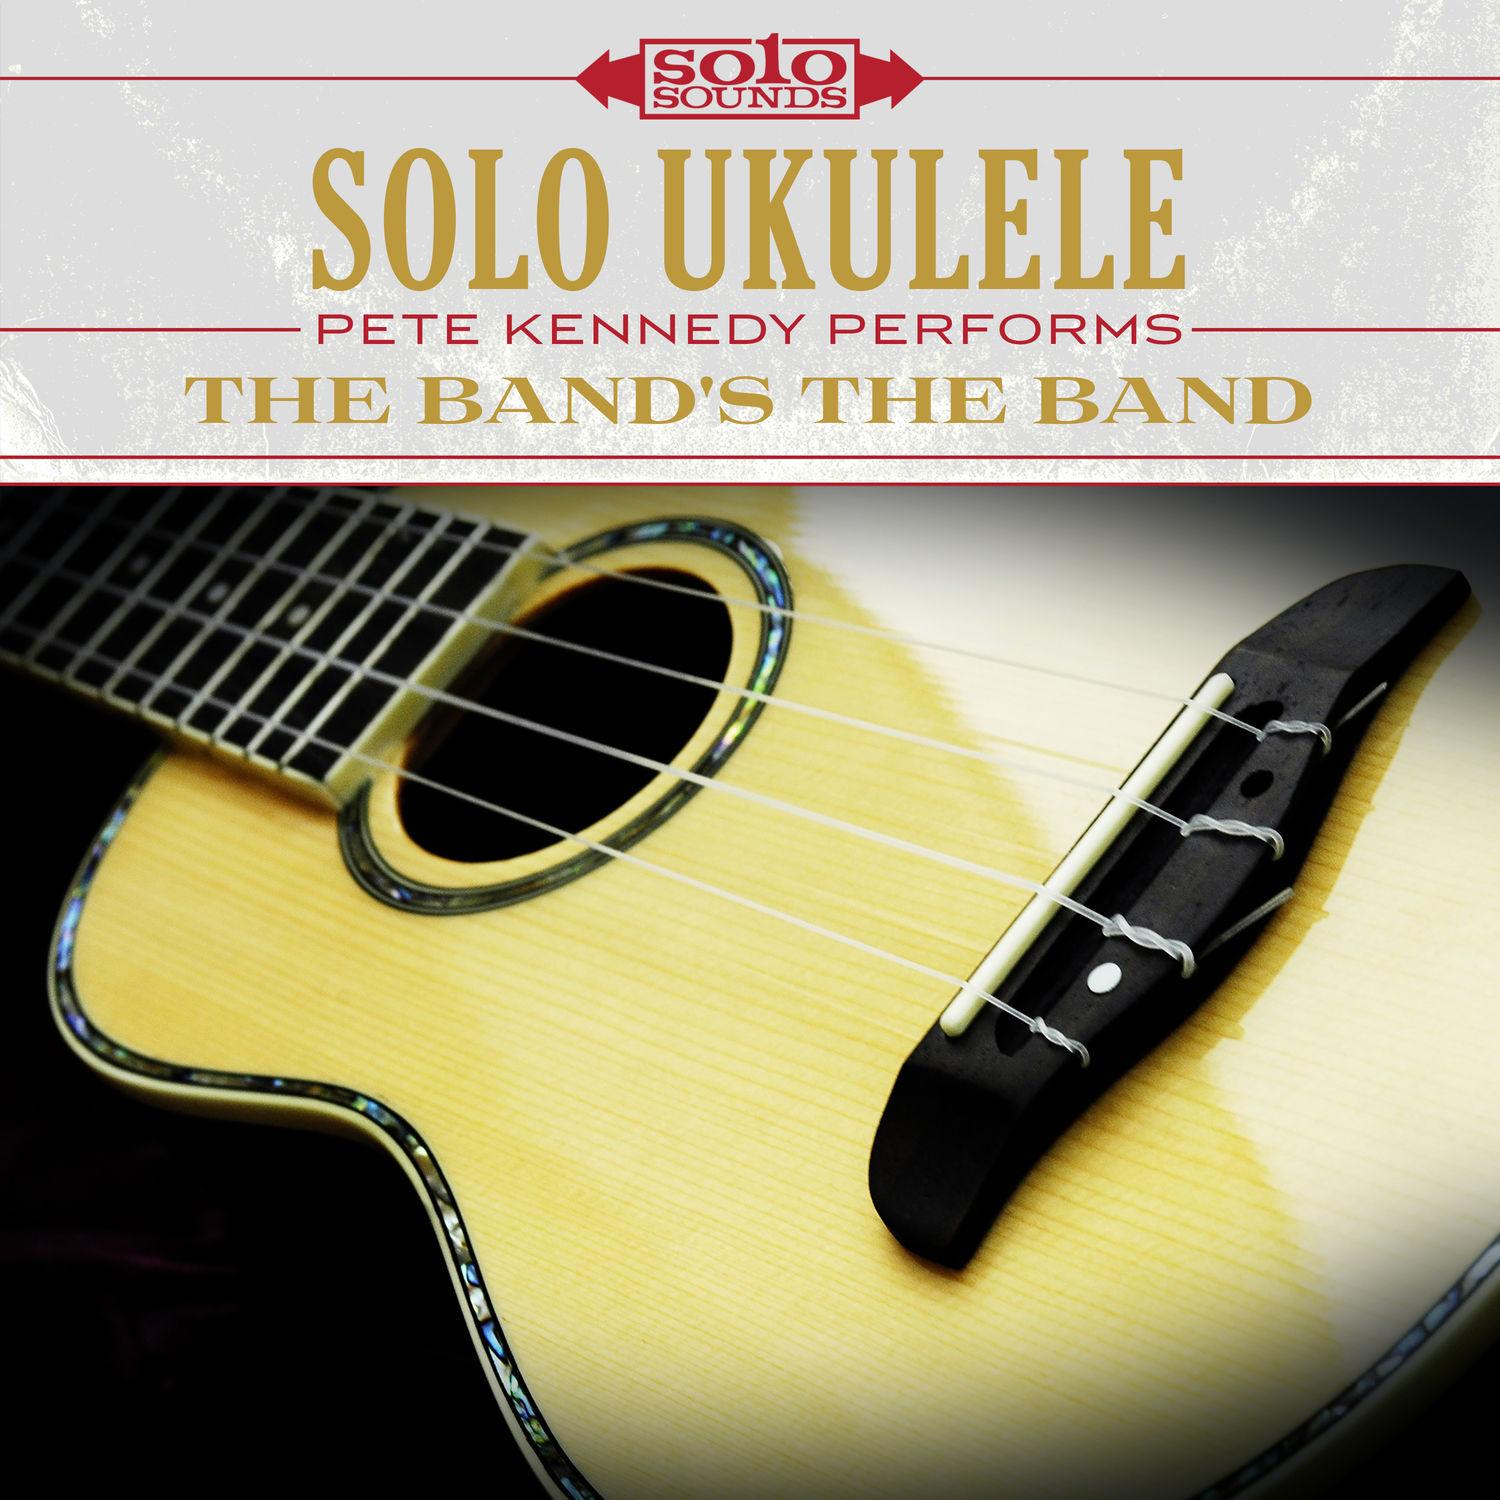 Solo Sounds – Solo Ukulele- The Band’s the Band